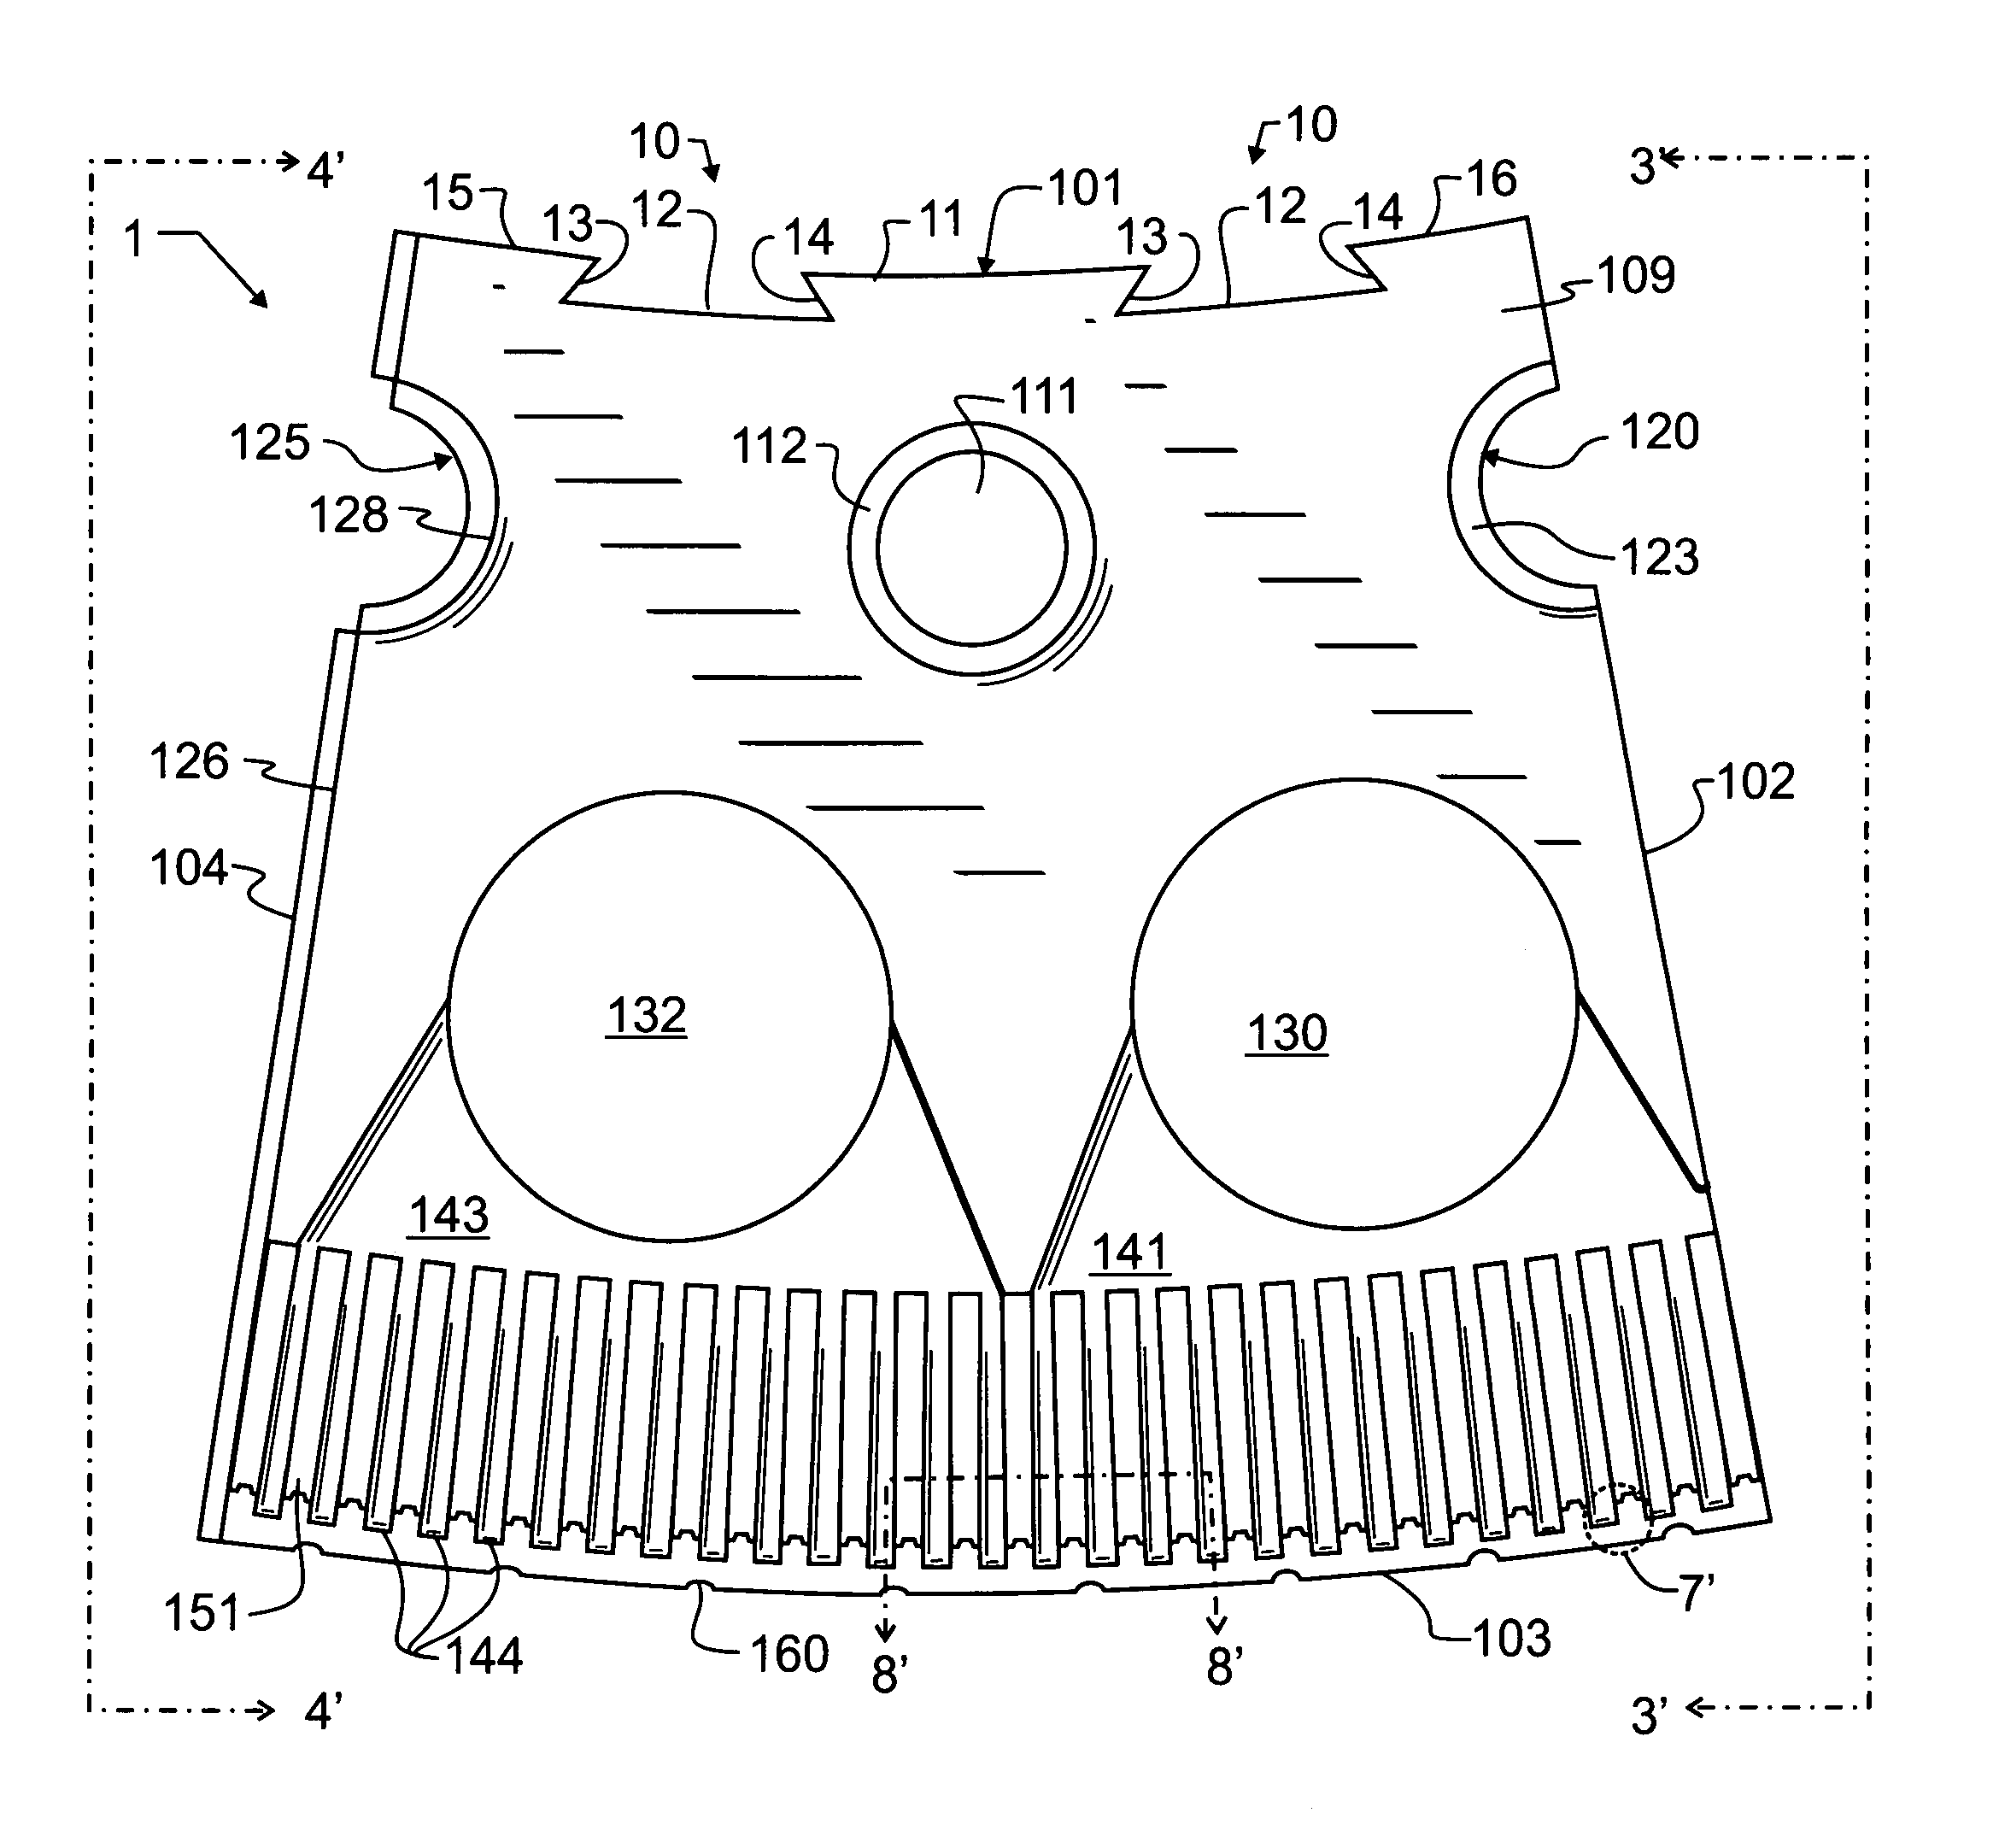 Apparatus for shaping and perforating a plastic film